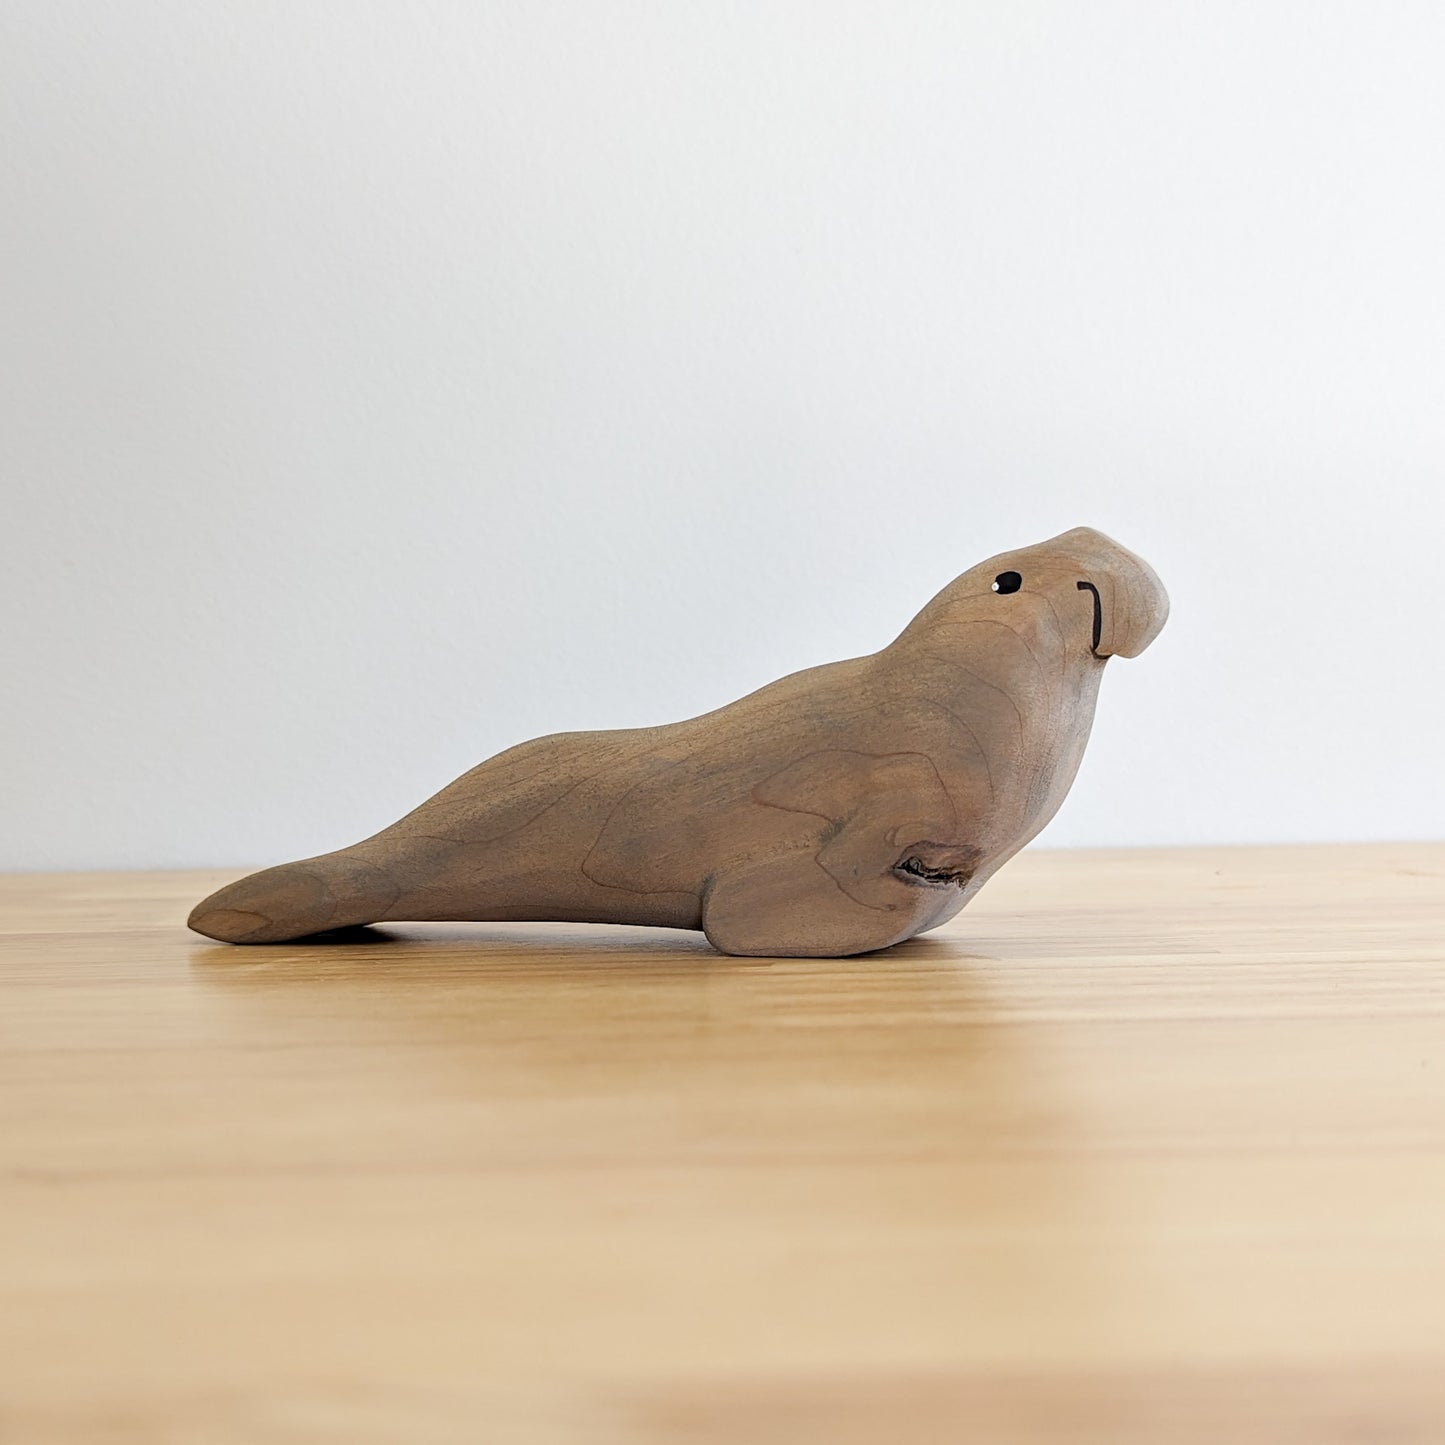 Elephant Seal ~ Wooden Toy